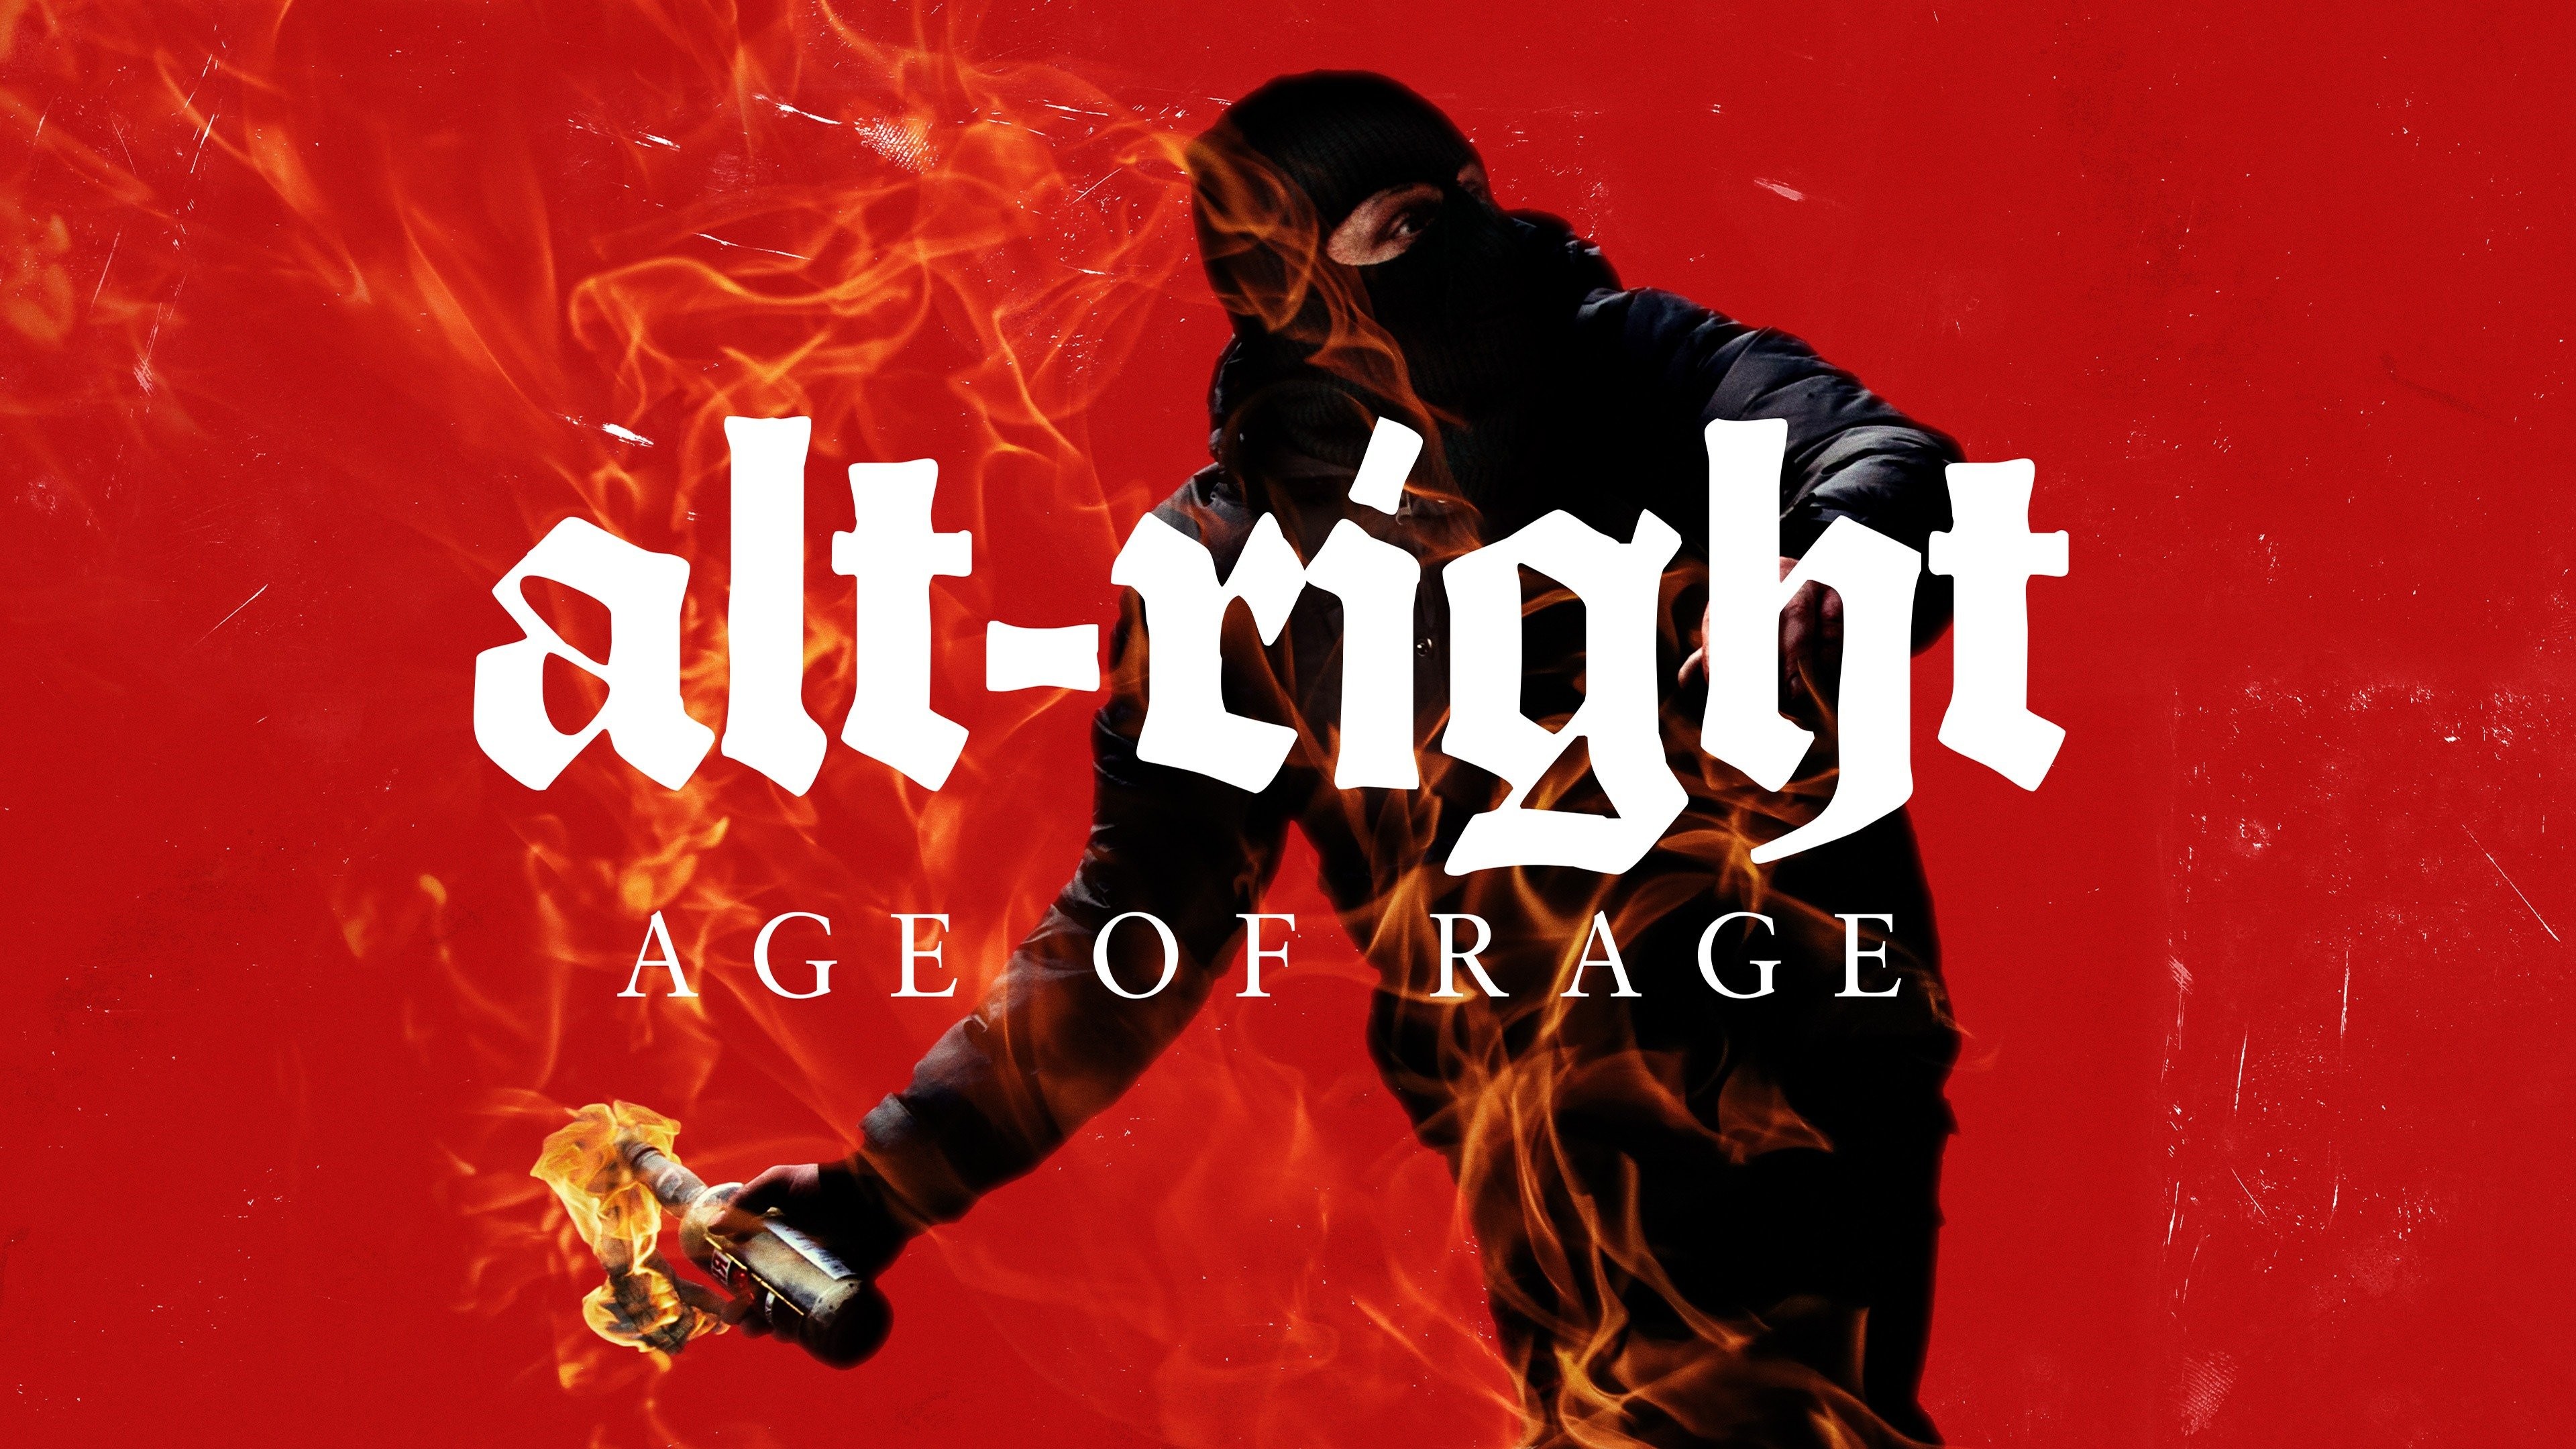 The Age Of Rage